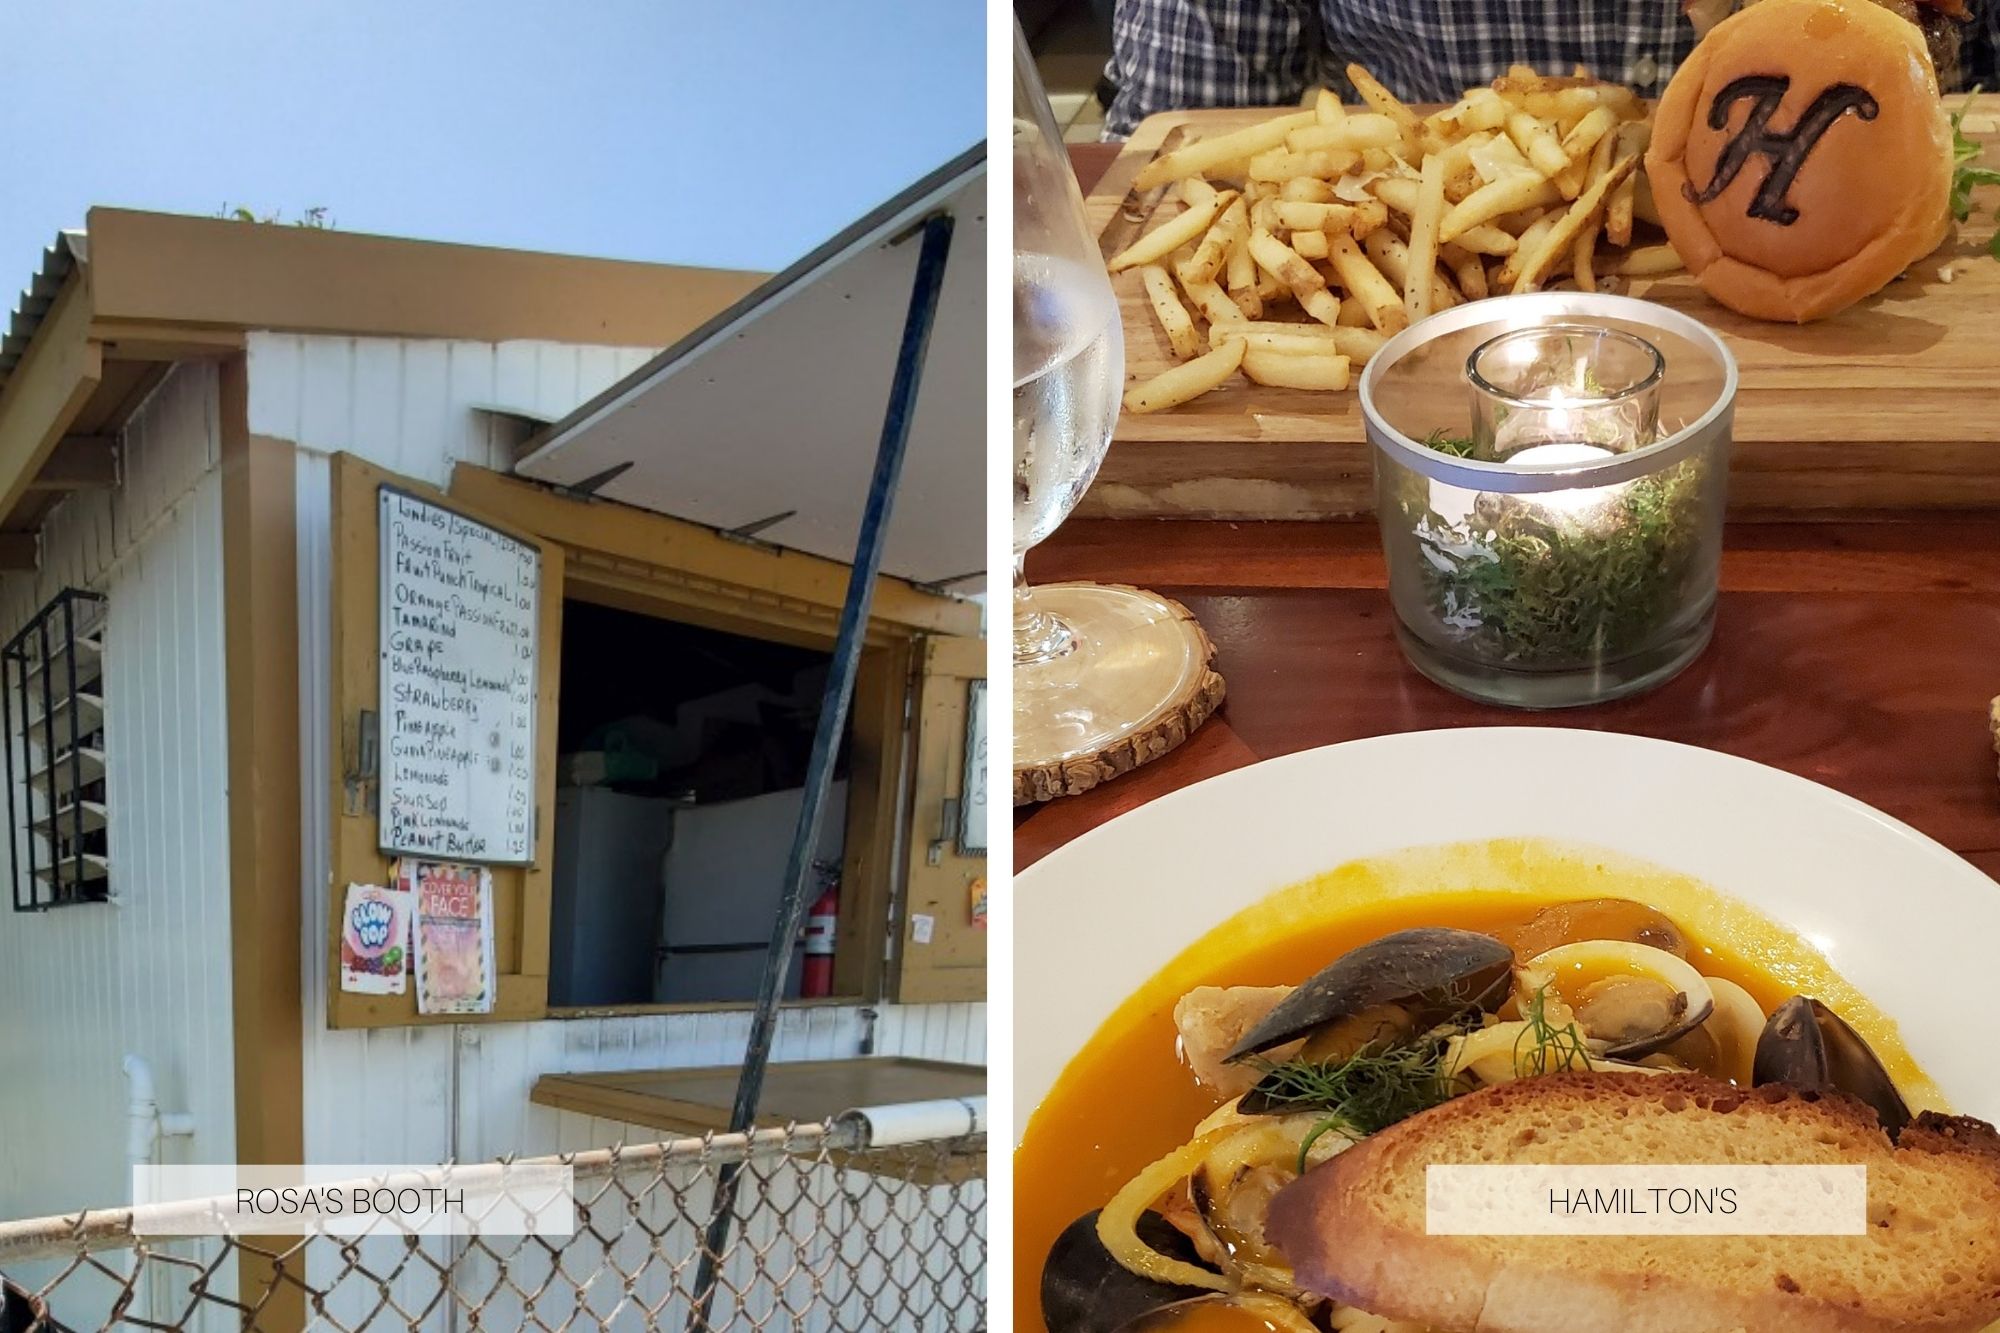 Left: Rosa's Booth is a white painted small shed-sized building and it has a dry erase board with a menu of fruit pops; Right: the table at Hamiltons with a seafood soup with mussels and fish, and a hamburger and fries. The hamburger bun is seared with an H